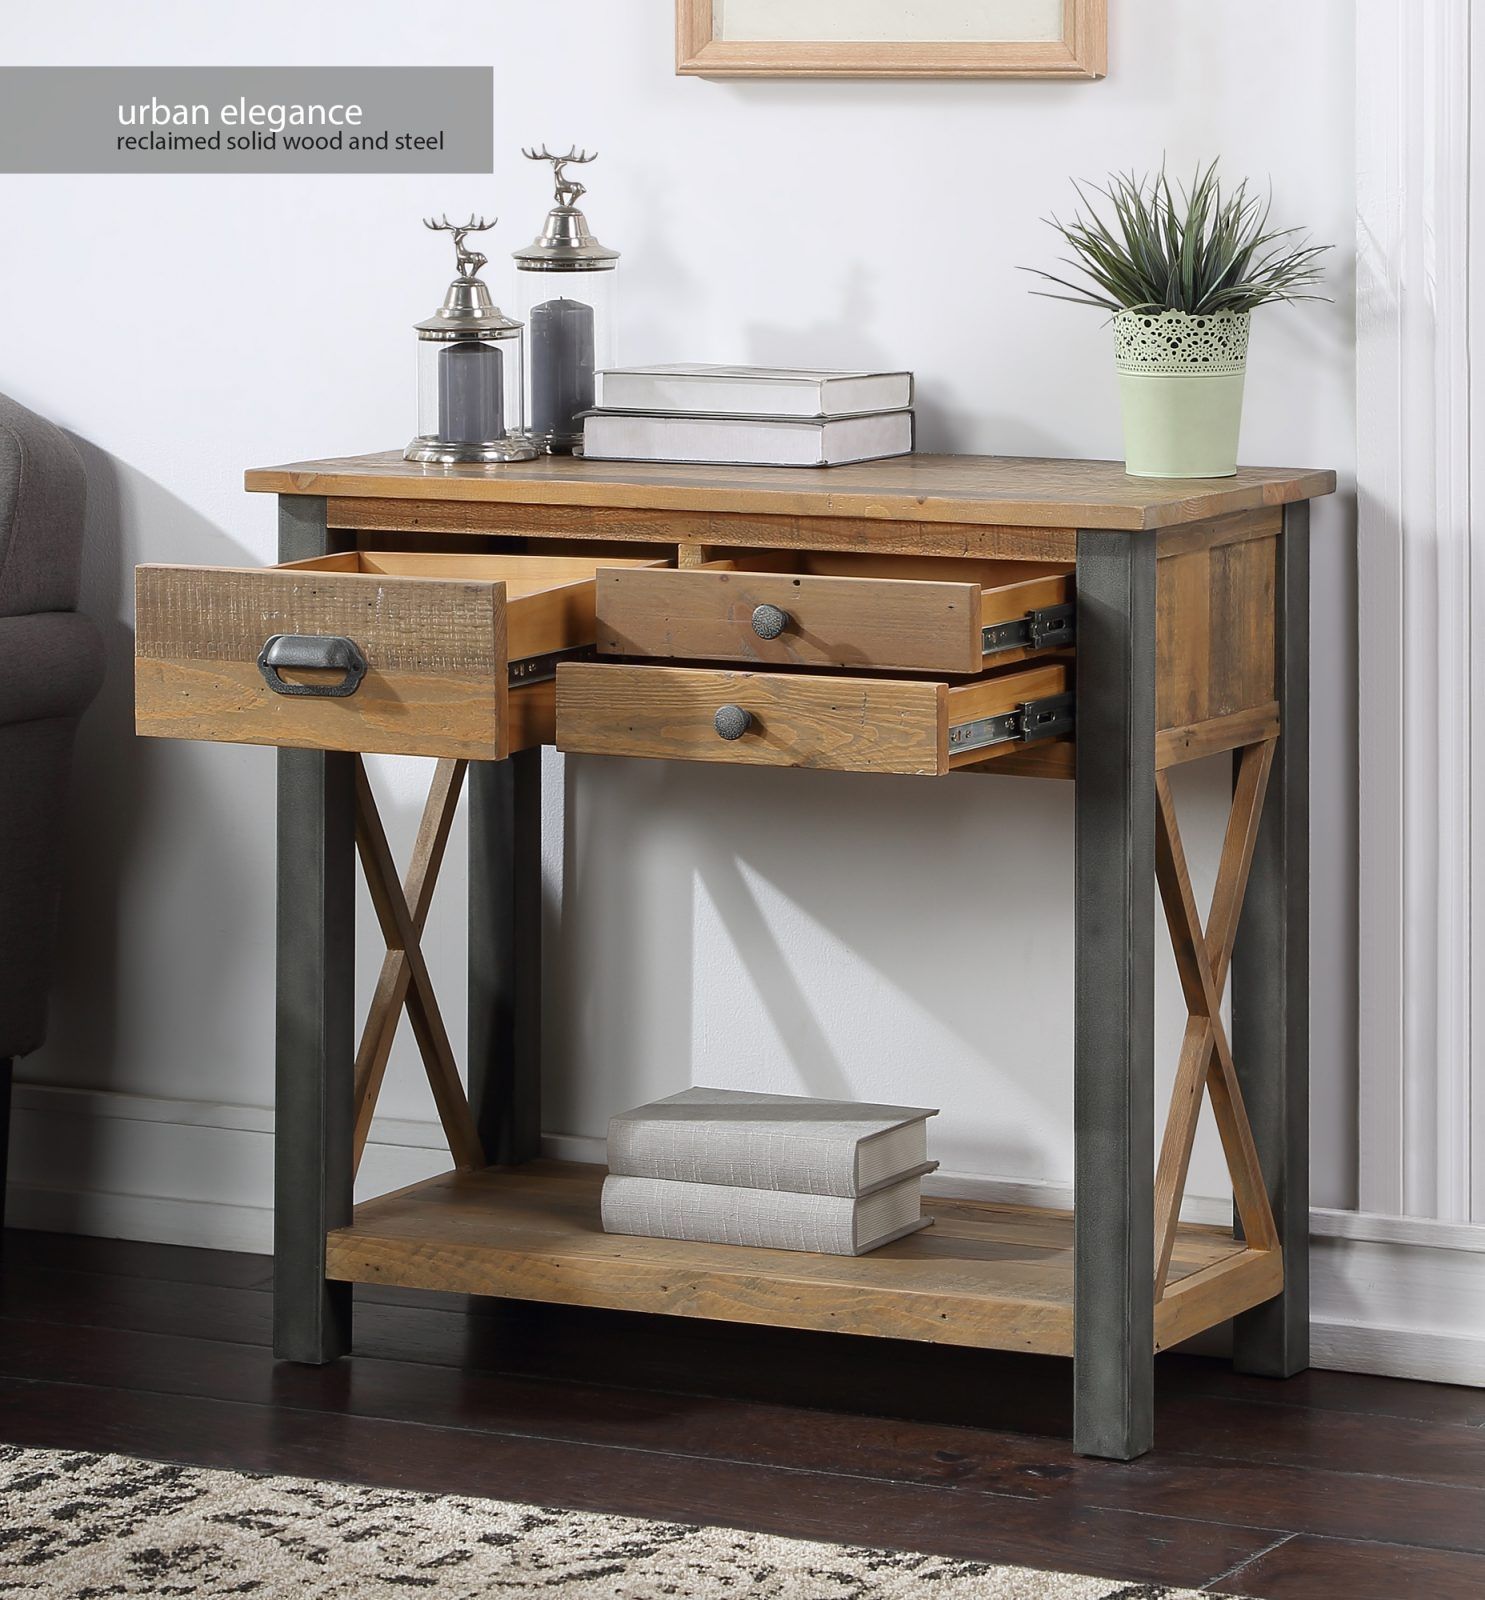 Urban Elegance – Reclaimed Small Console Table – Mango With Regard To Open Storage Console Tables (View 12 of 20)